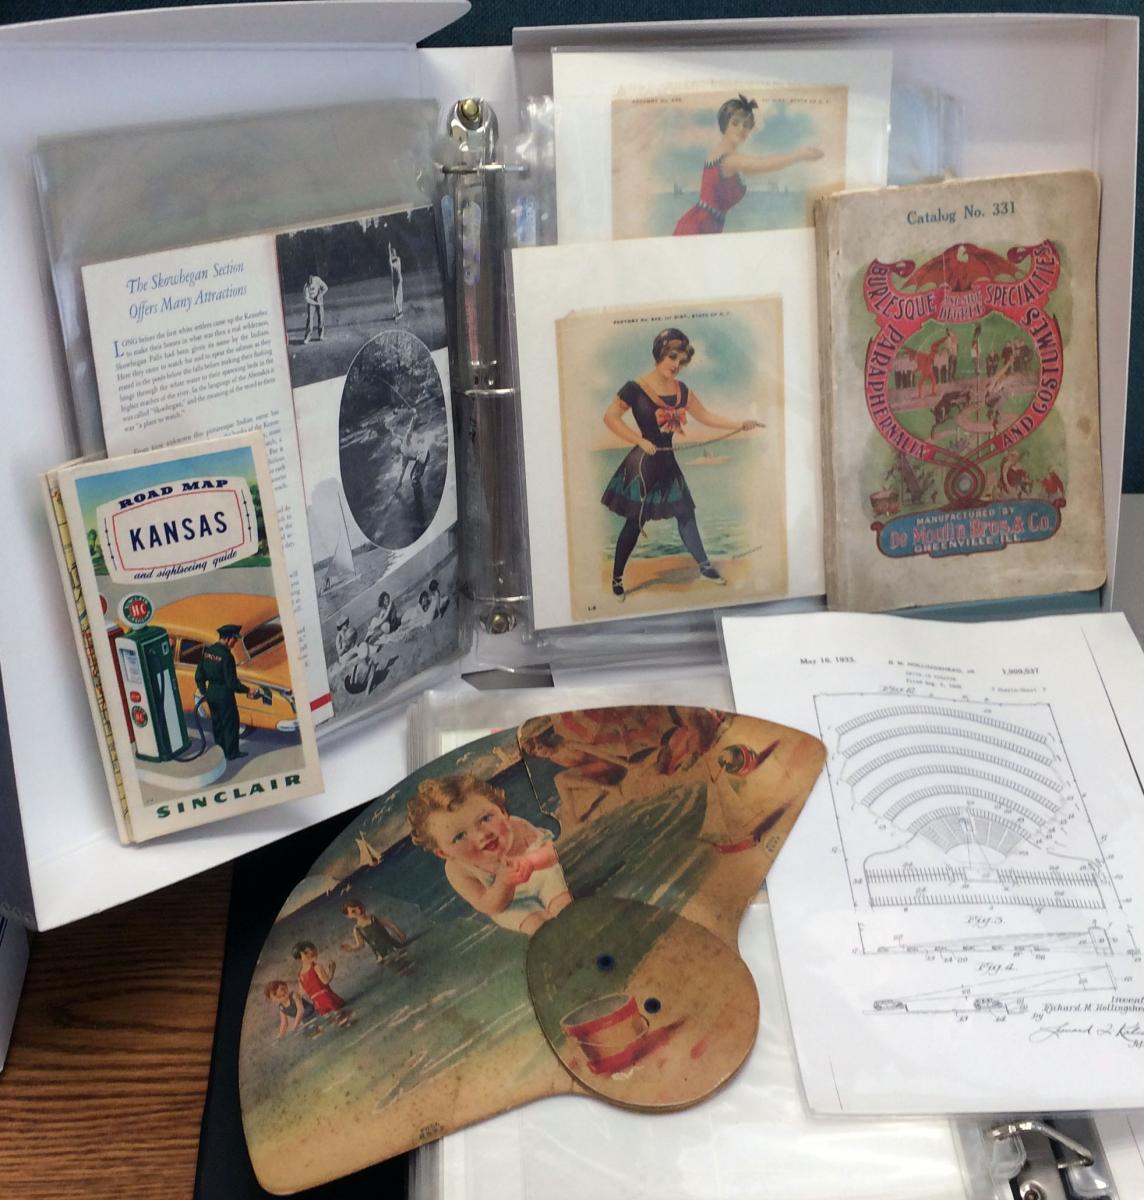 Works in progress from the John Margolies Collection of Travel Ephemera